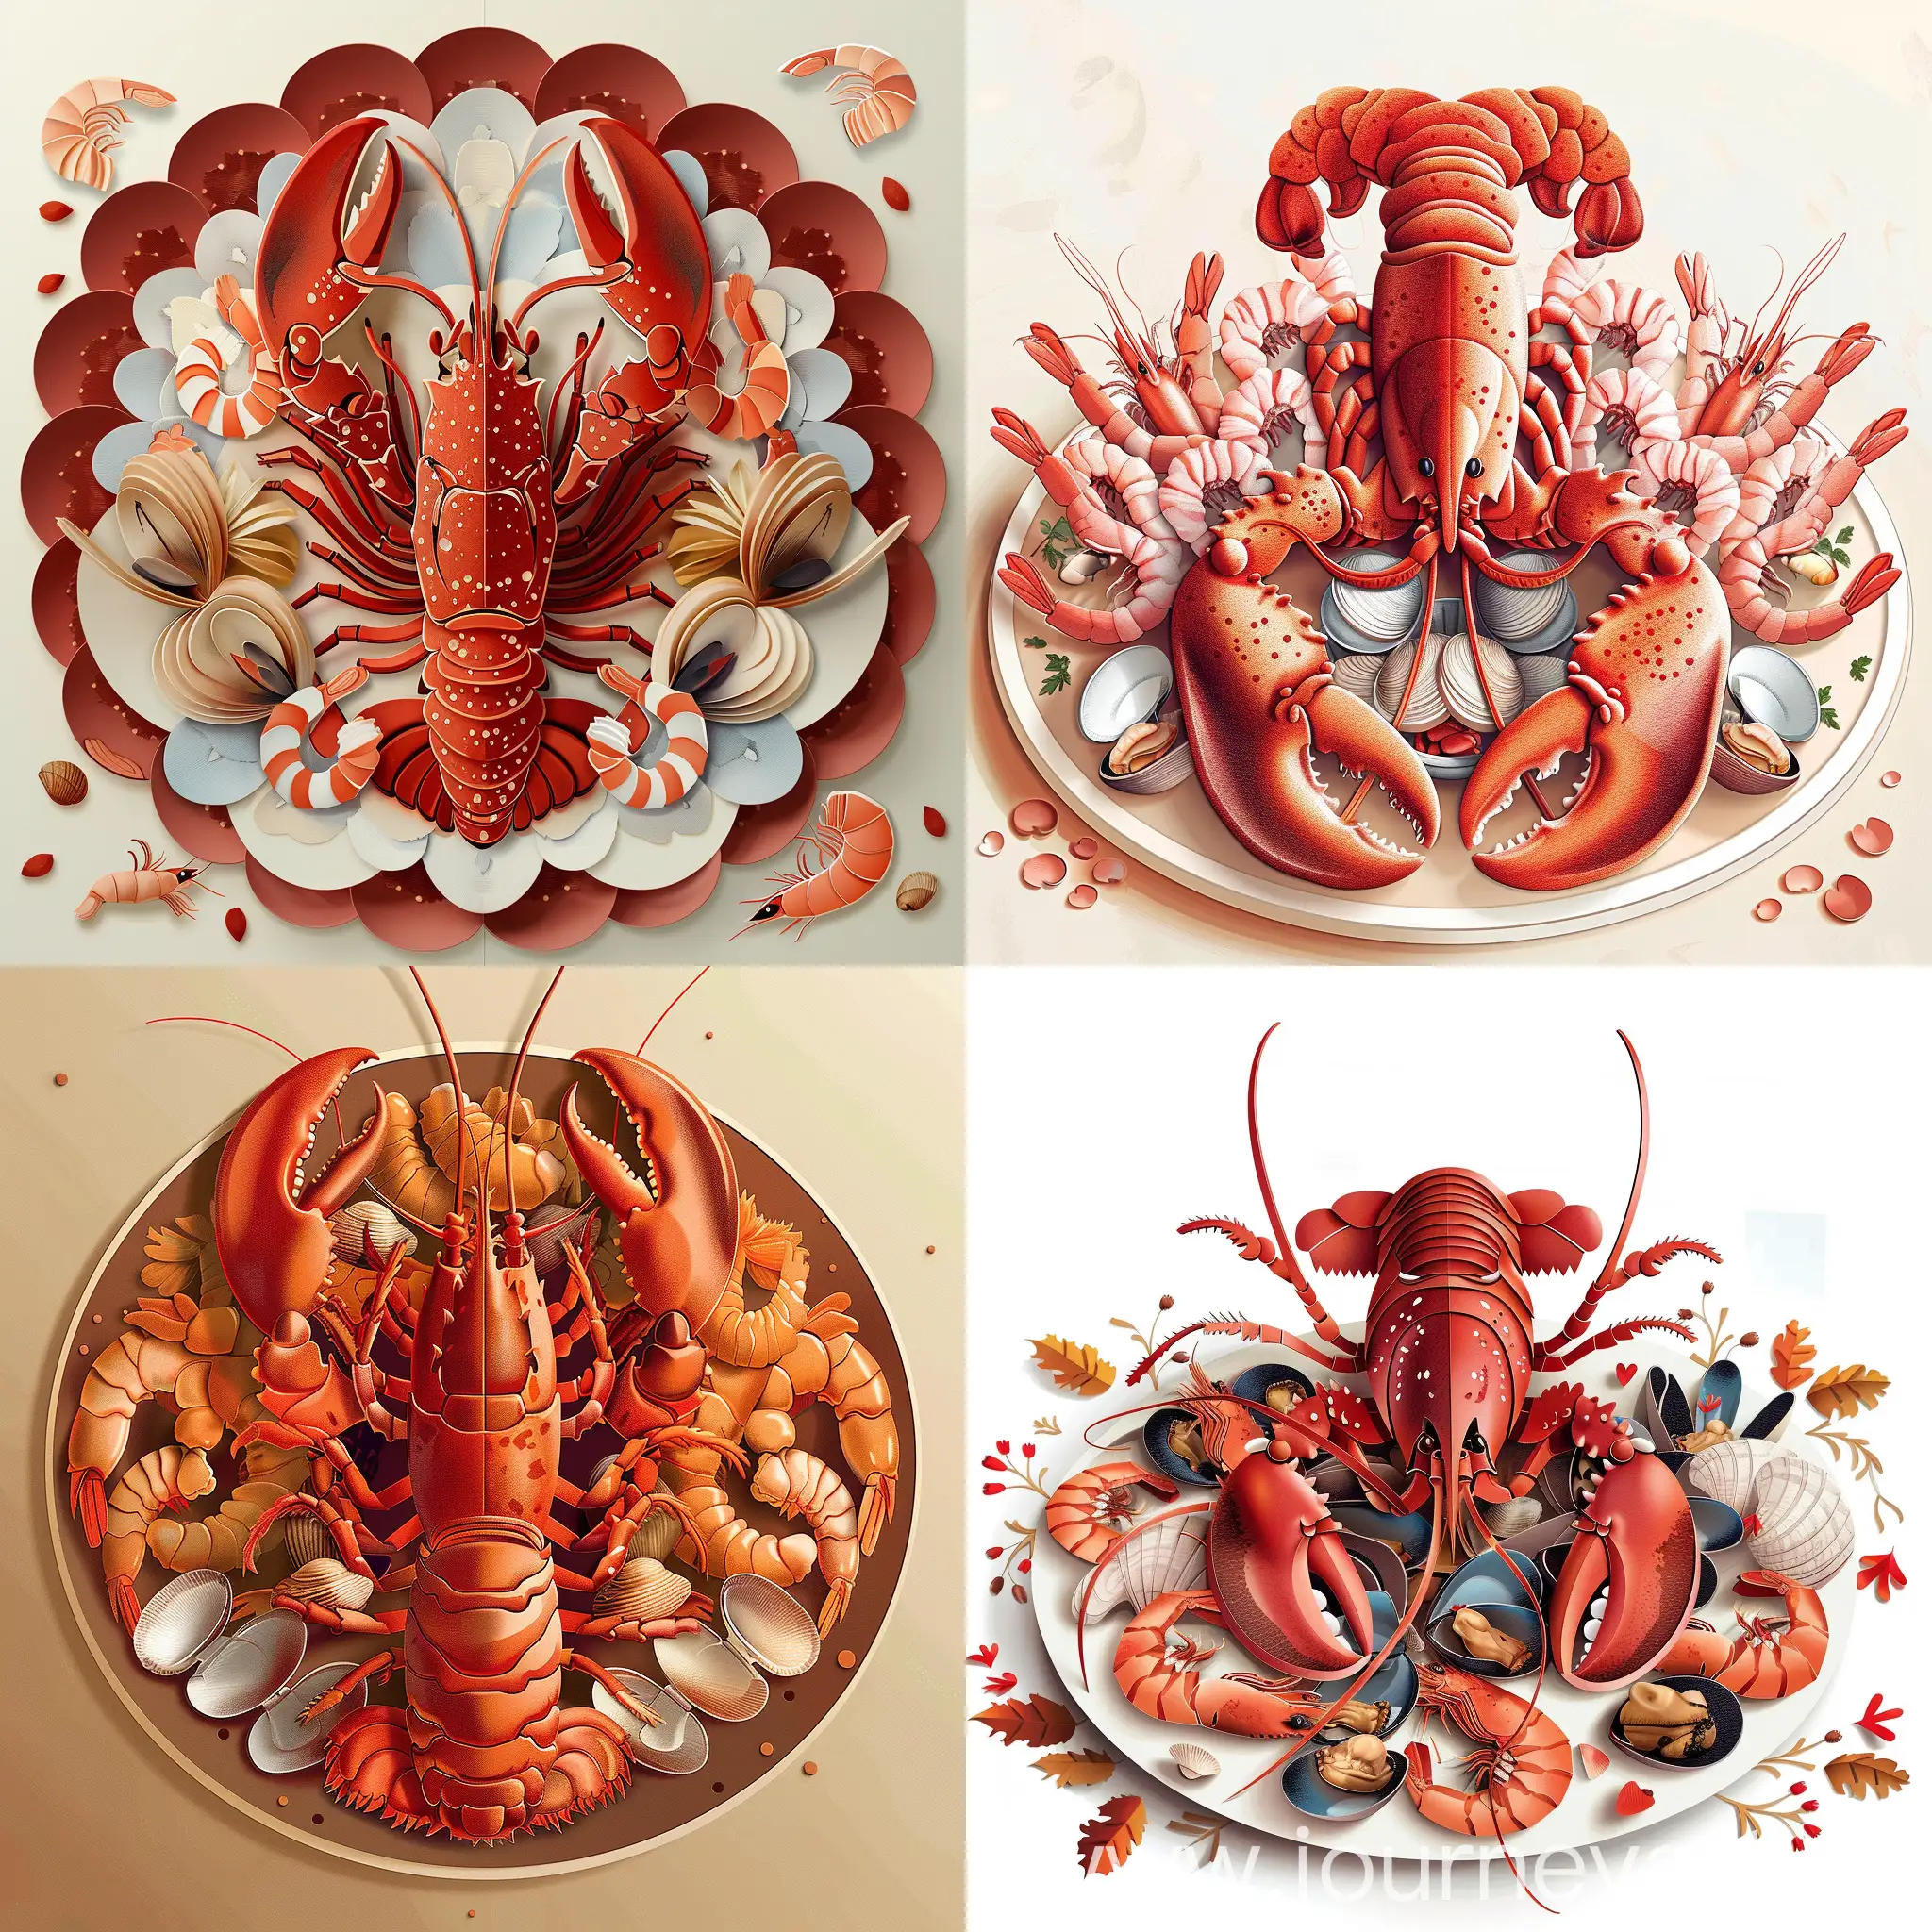 cut paper art of a mouthwatering platter of seafood, featuring a large lobster as the centerpiece, surrounded by shrimp and clams, high quality details, in vector style 